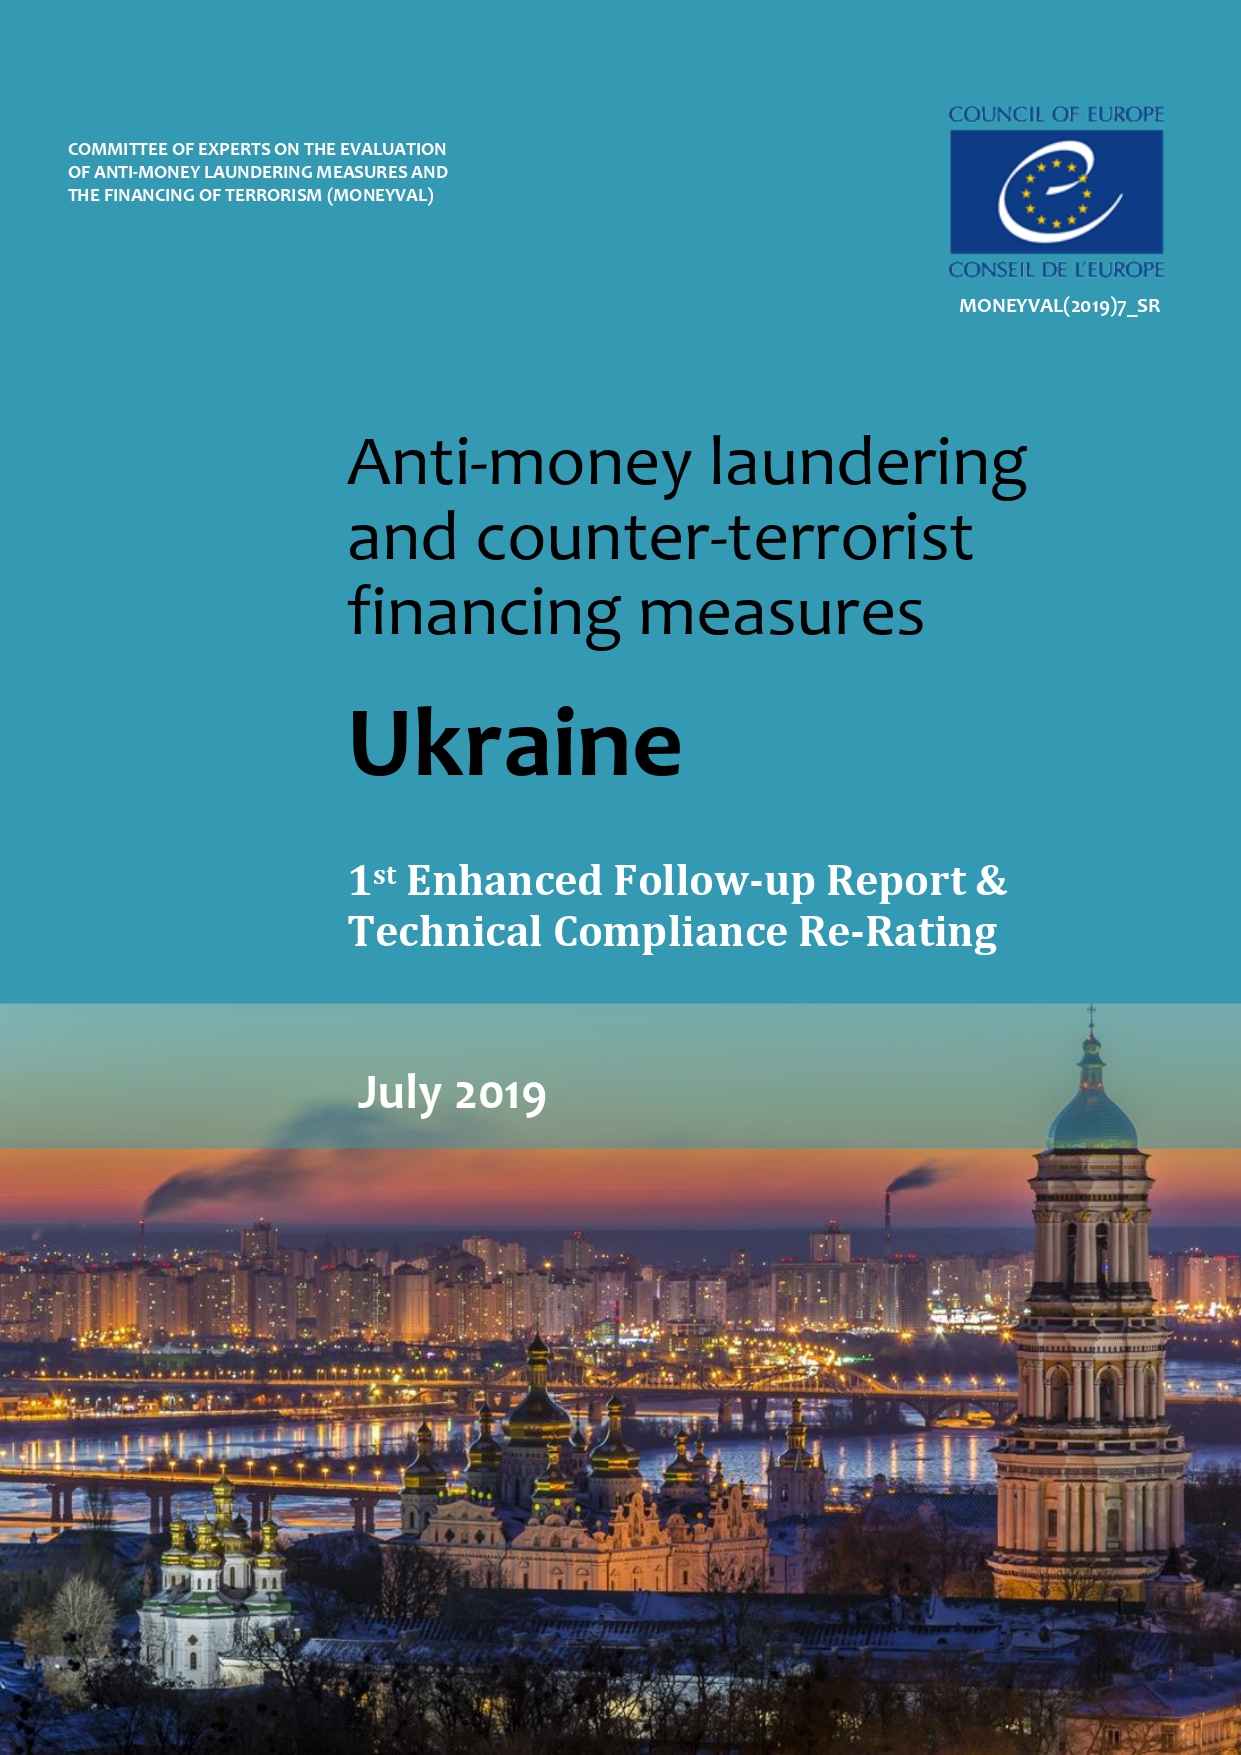 The first Follow-Up Report following the results of the MONEYVAL 5th round of mutual evaluation of Ukraine